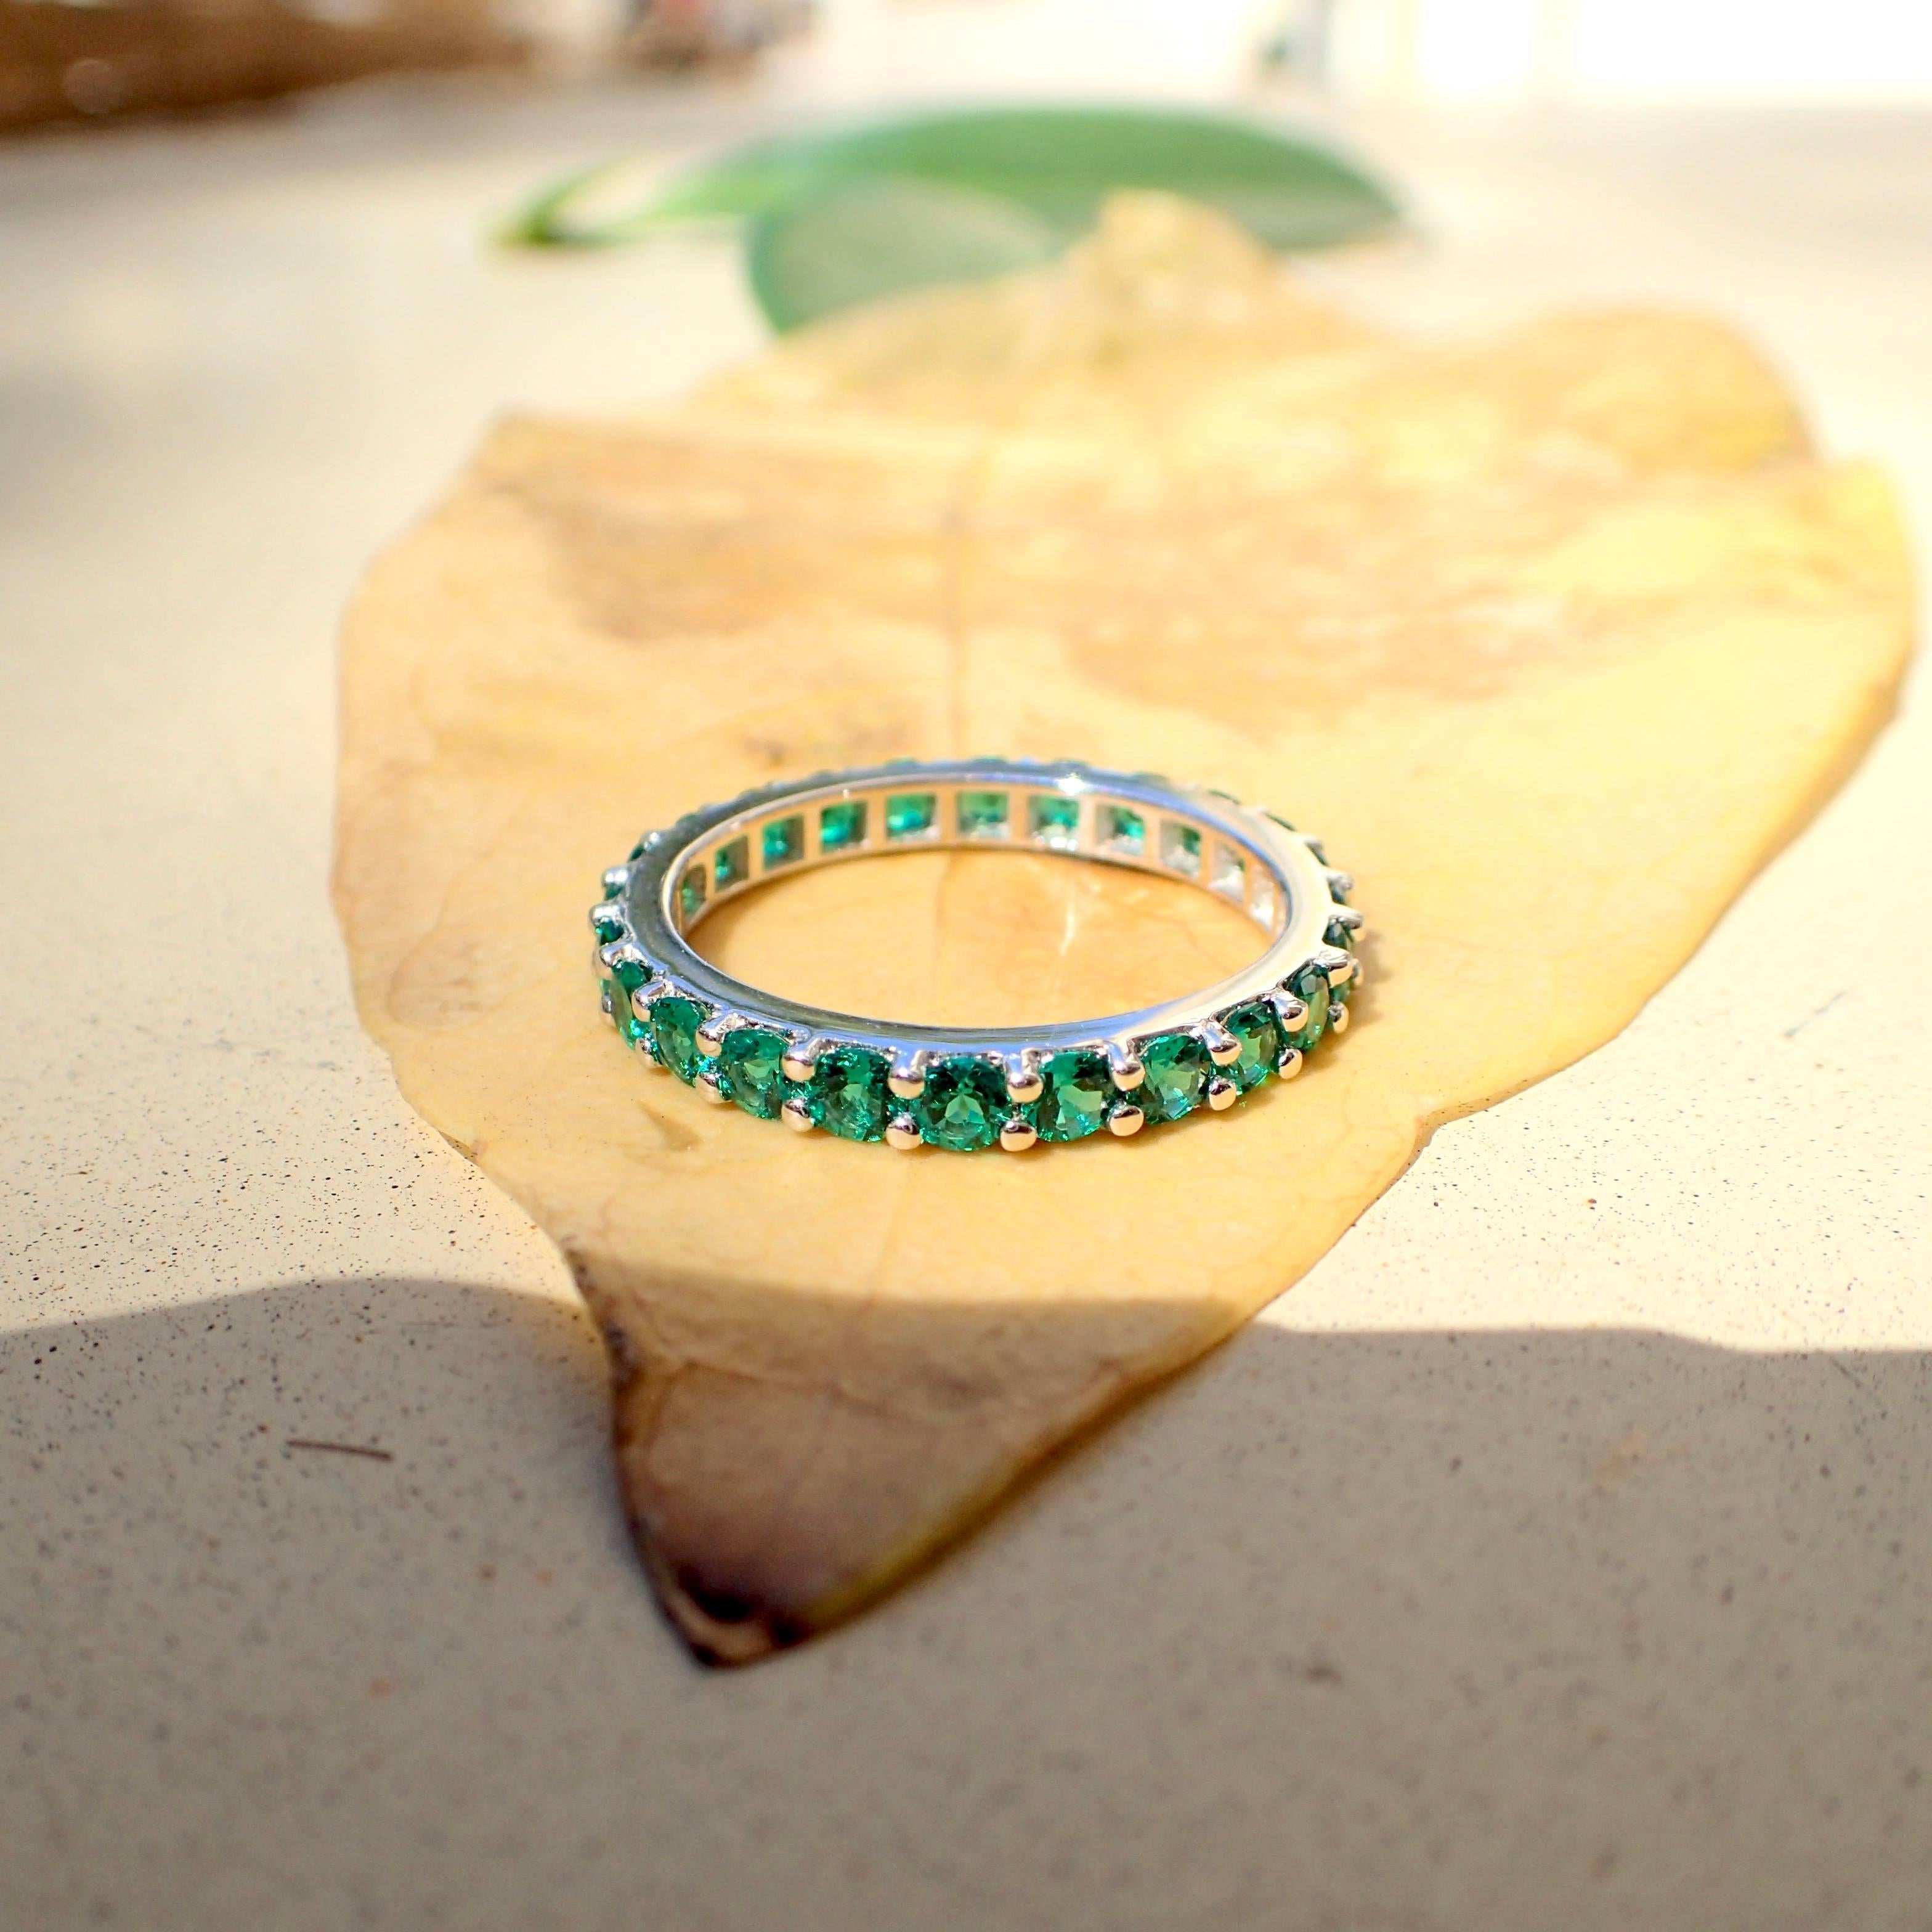 Contemporary 18 Karat Gold Eternity Band with Chatham-Created Emeralds Weighing 1.22 Carat